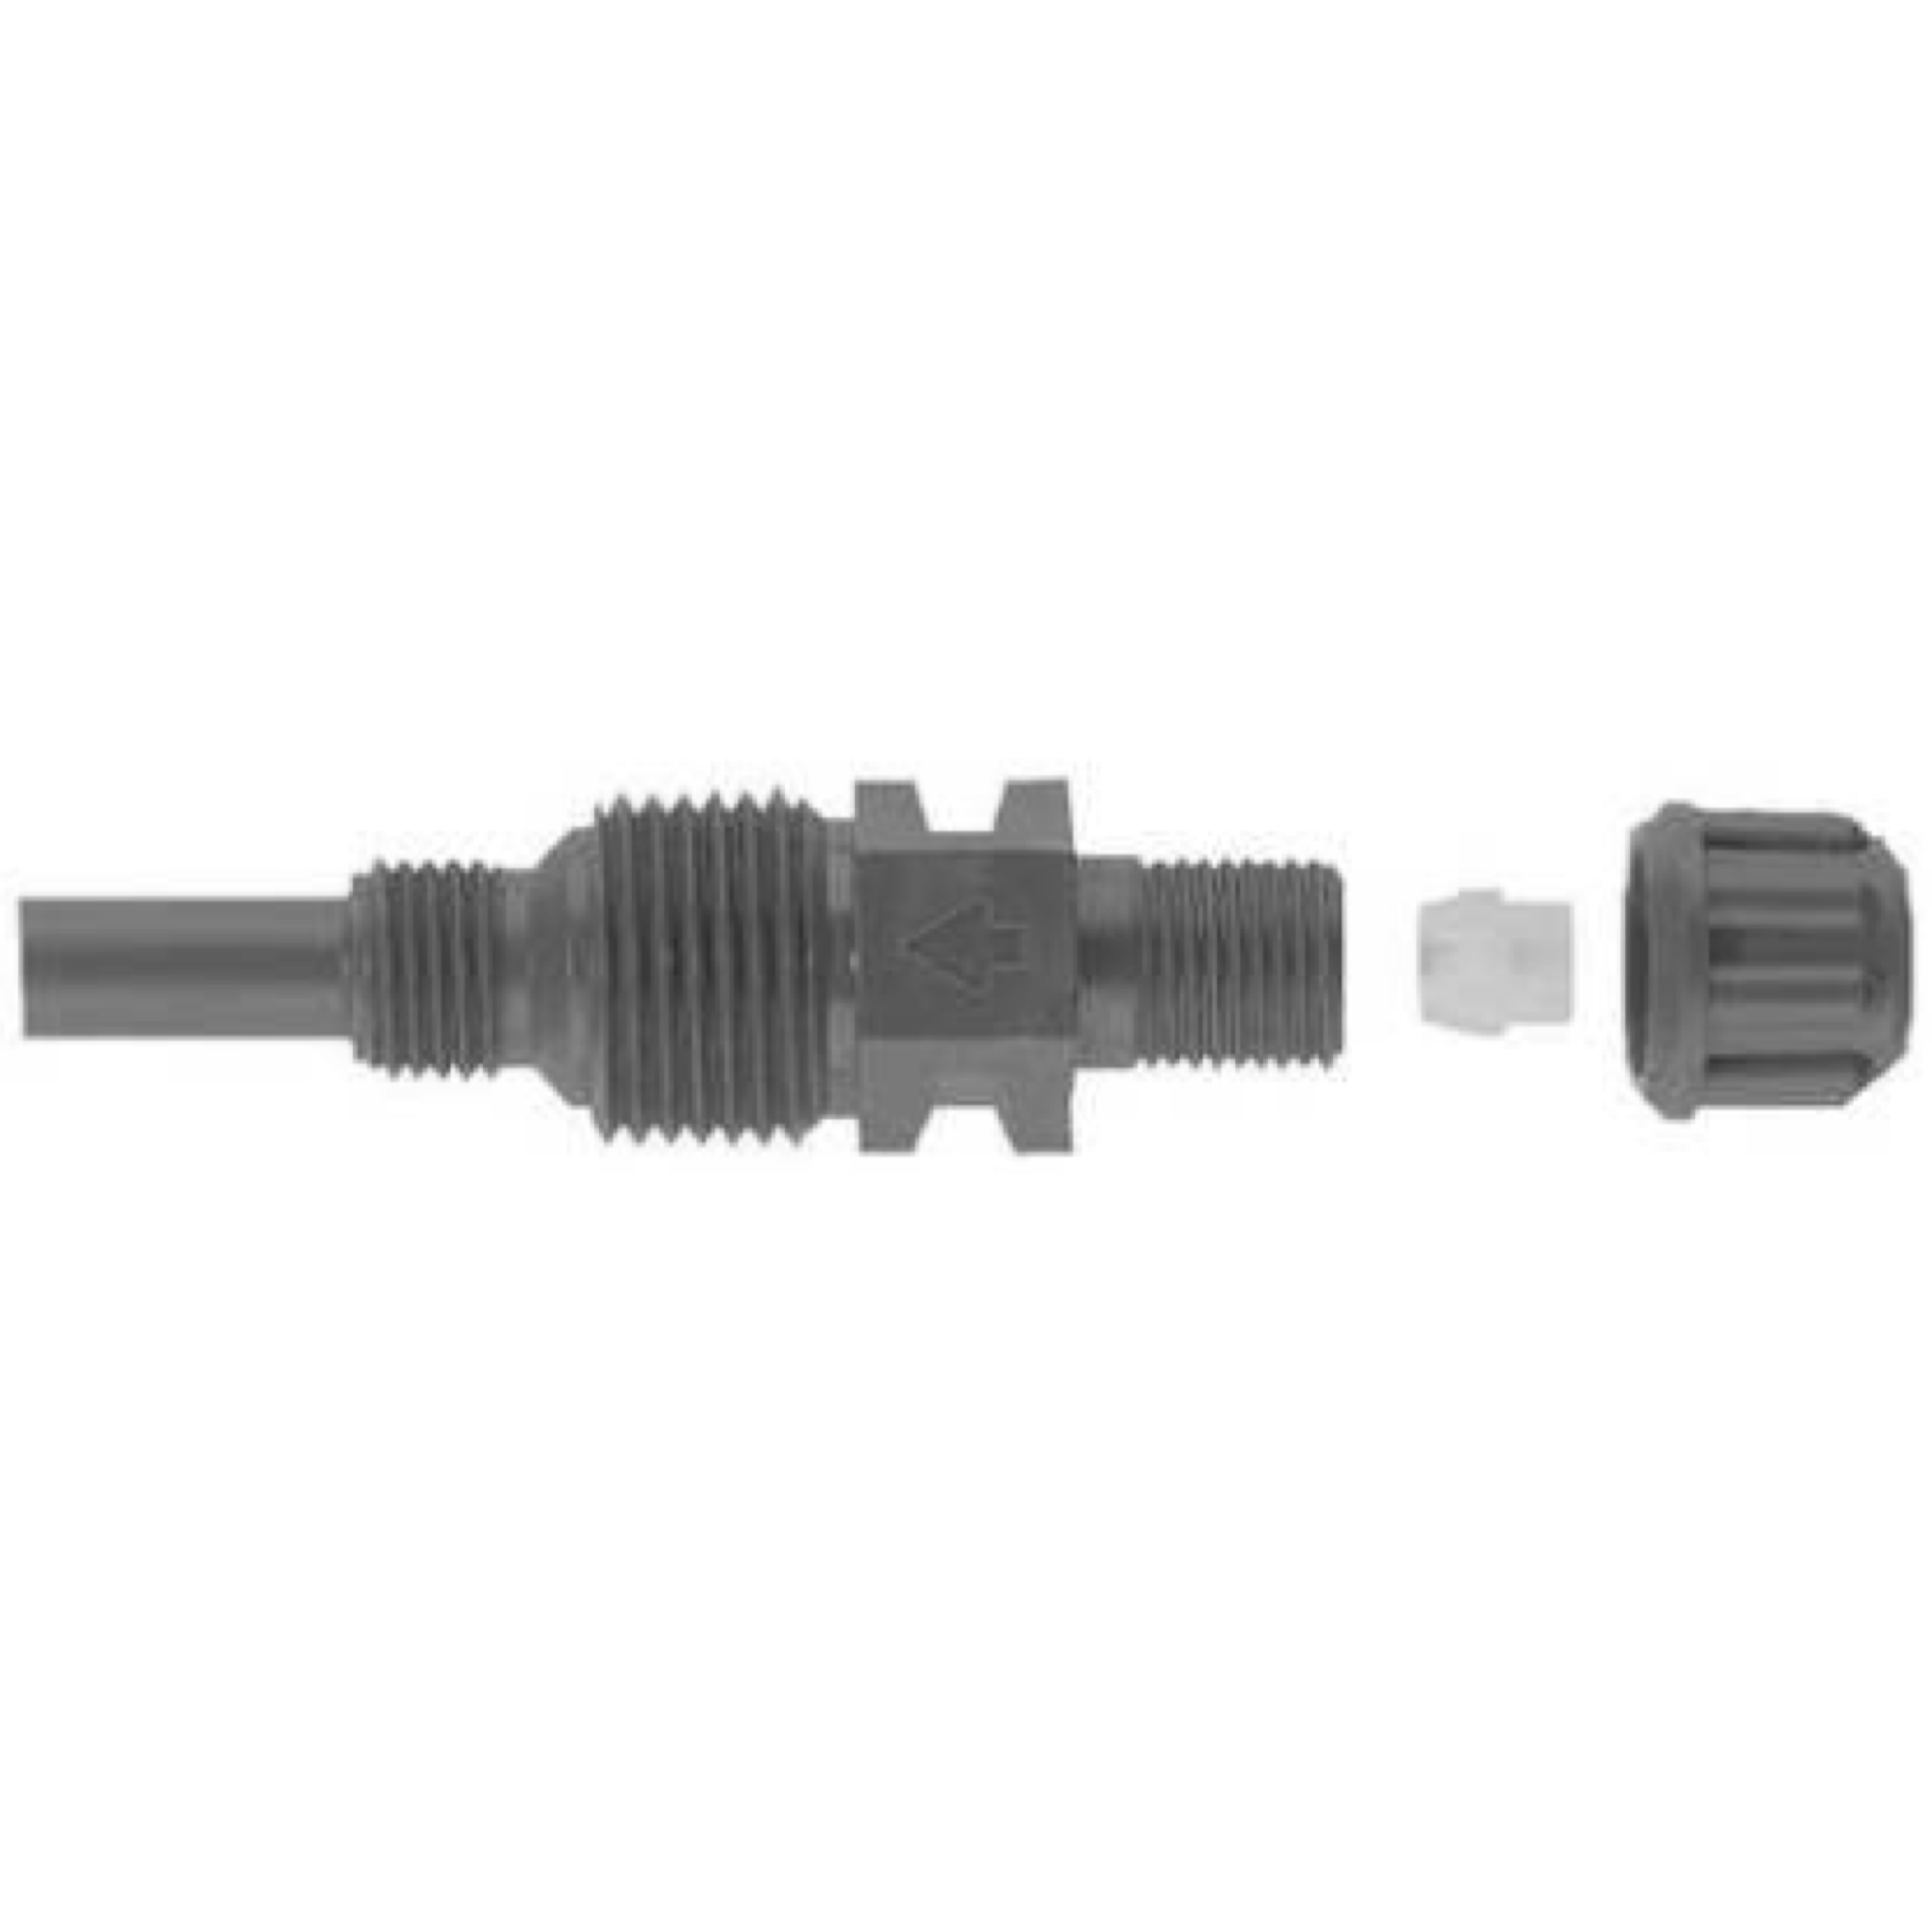 Stenner Injection Fitting with Nut with 1/4" Ferrule - UCAK300